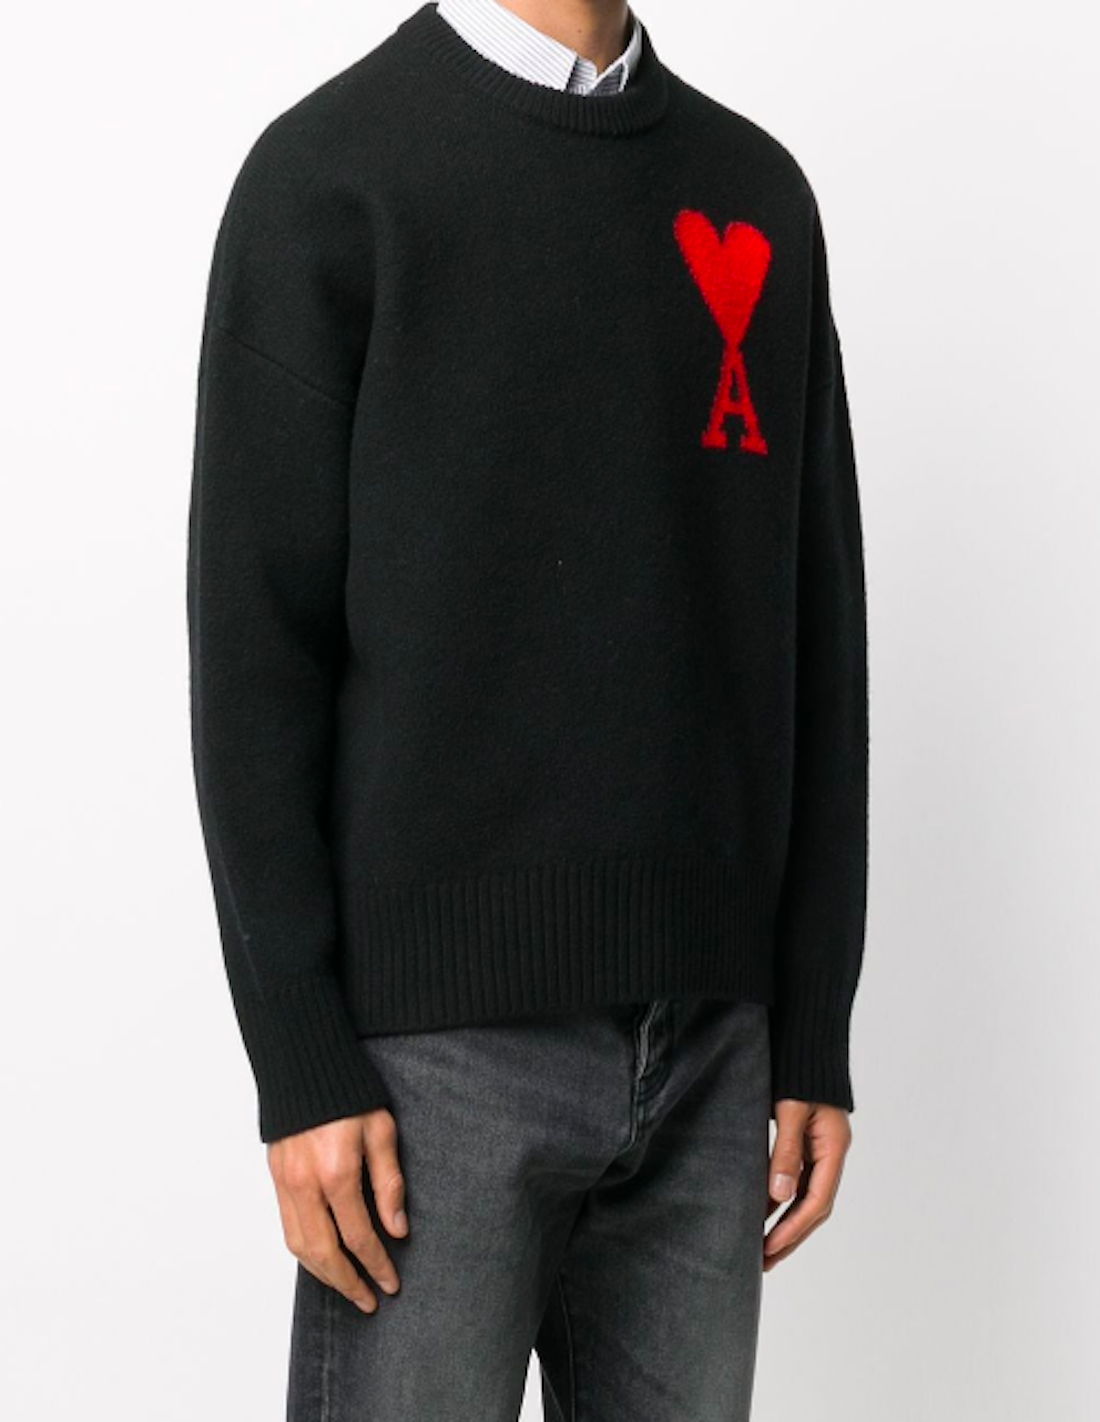 BLACK ROUND COLLAR PULLOVER WITH OVERSIZE RED HEART EMBROIDERED AMI PARIS